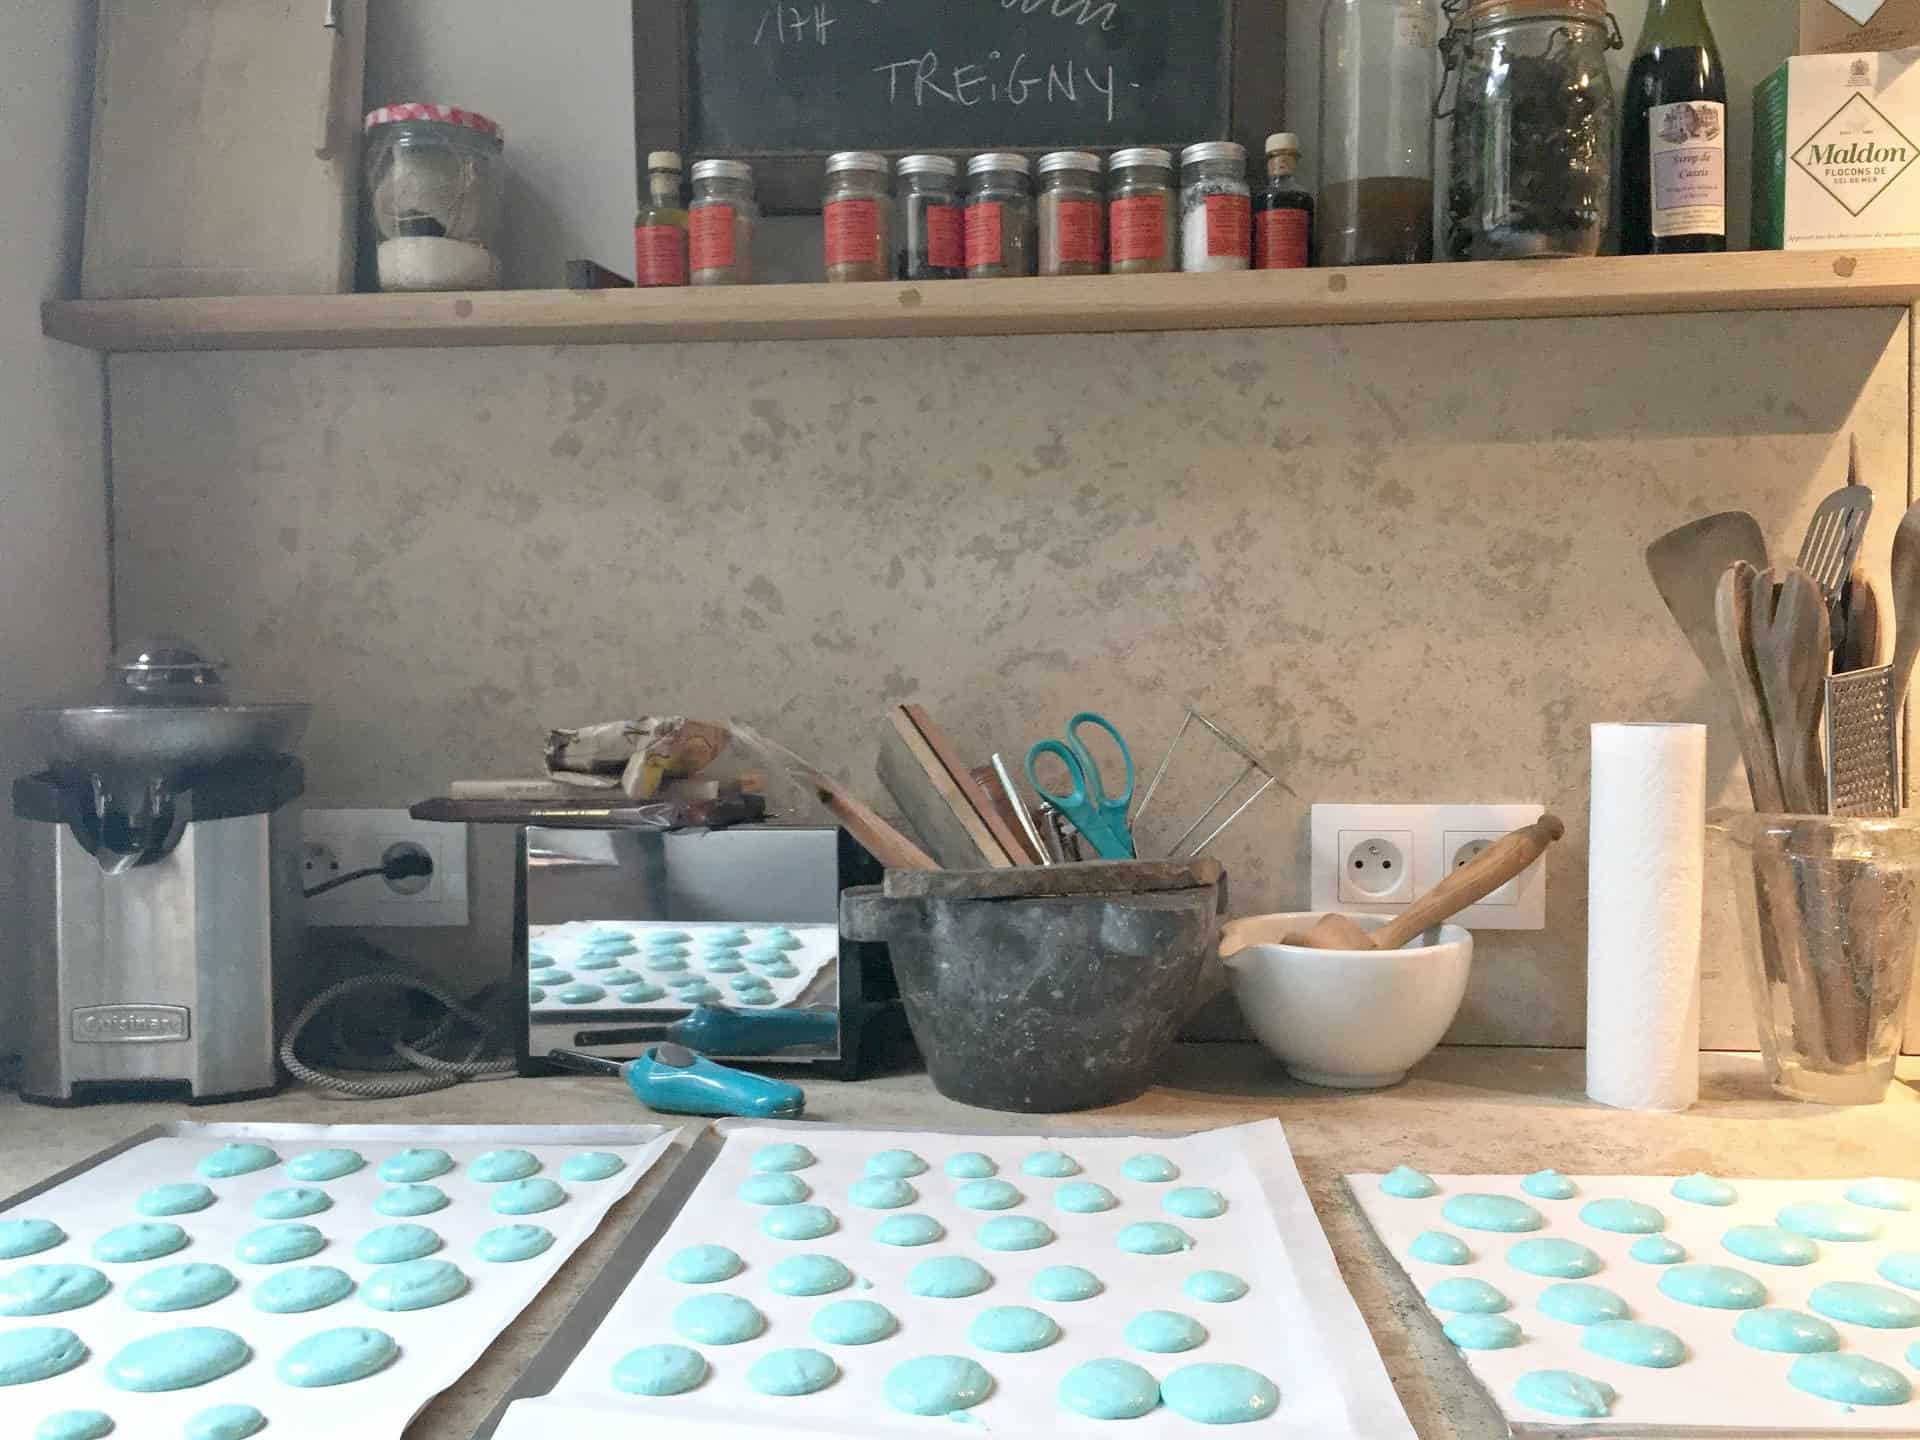 Making Macarons With Noemi at the Jeanne D'Arc Cookery School